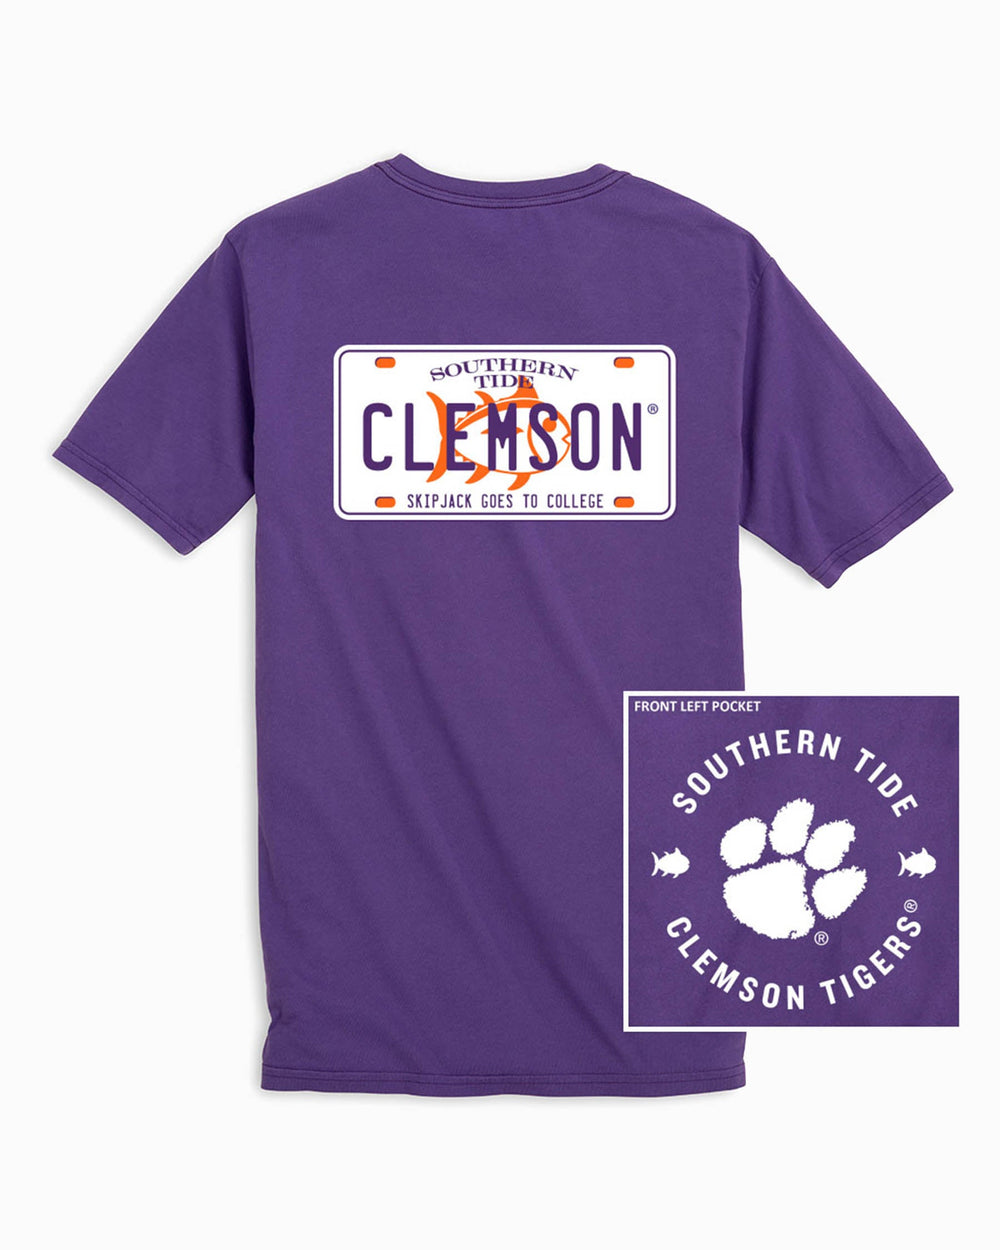 The front and back of the Clemson Tigers License Plate T-Shirt by Southern Tide - Regal Purple